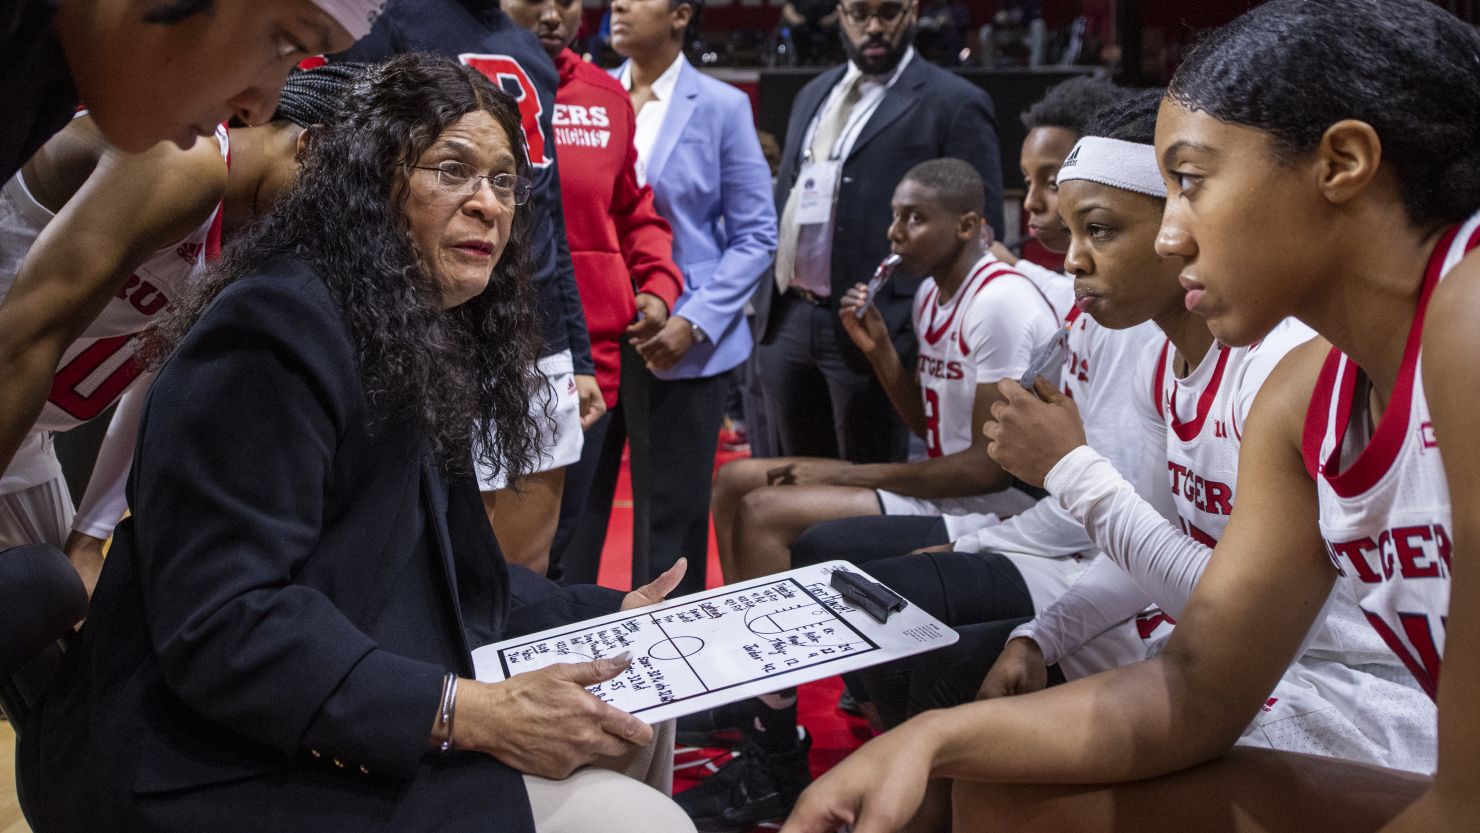 Retiring Rutgers women's basketball coach C. Vivian Stringer was inducted into the Naismith Basketball Hall of Fame in 2009.